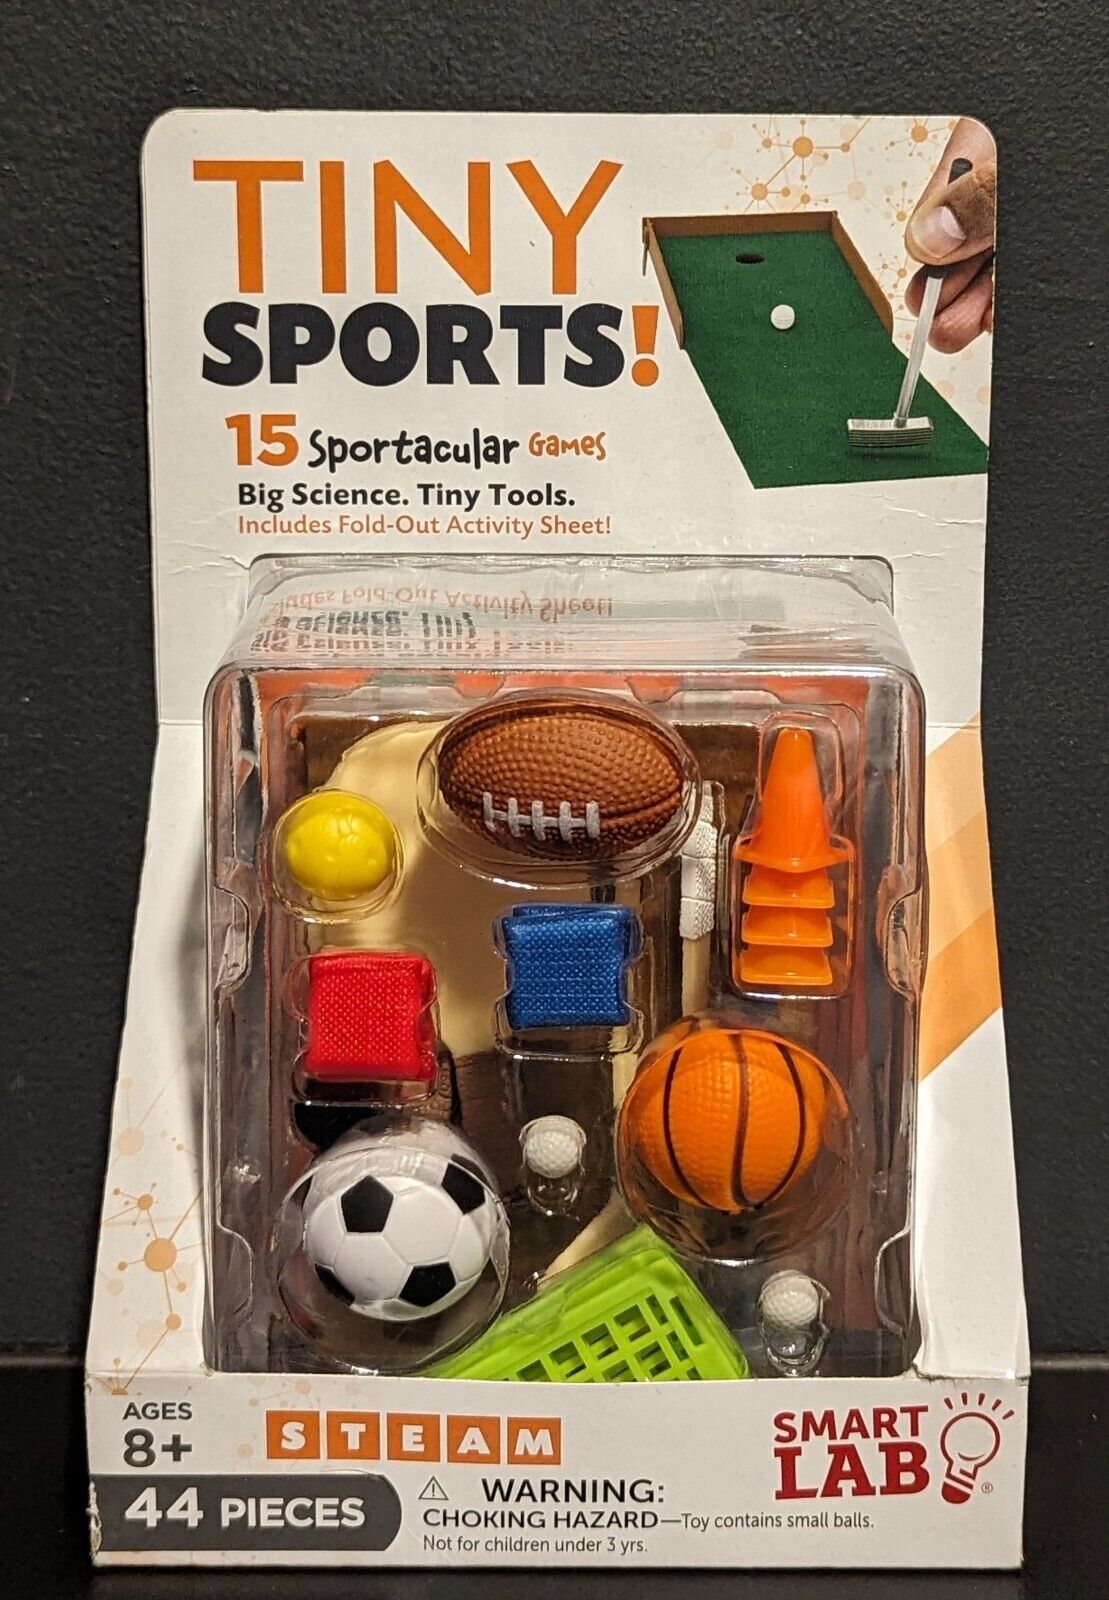 SmartLab Toys Tiny Sports with 15 Games And Tiny Tools 44 Piece Set - NEW